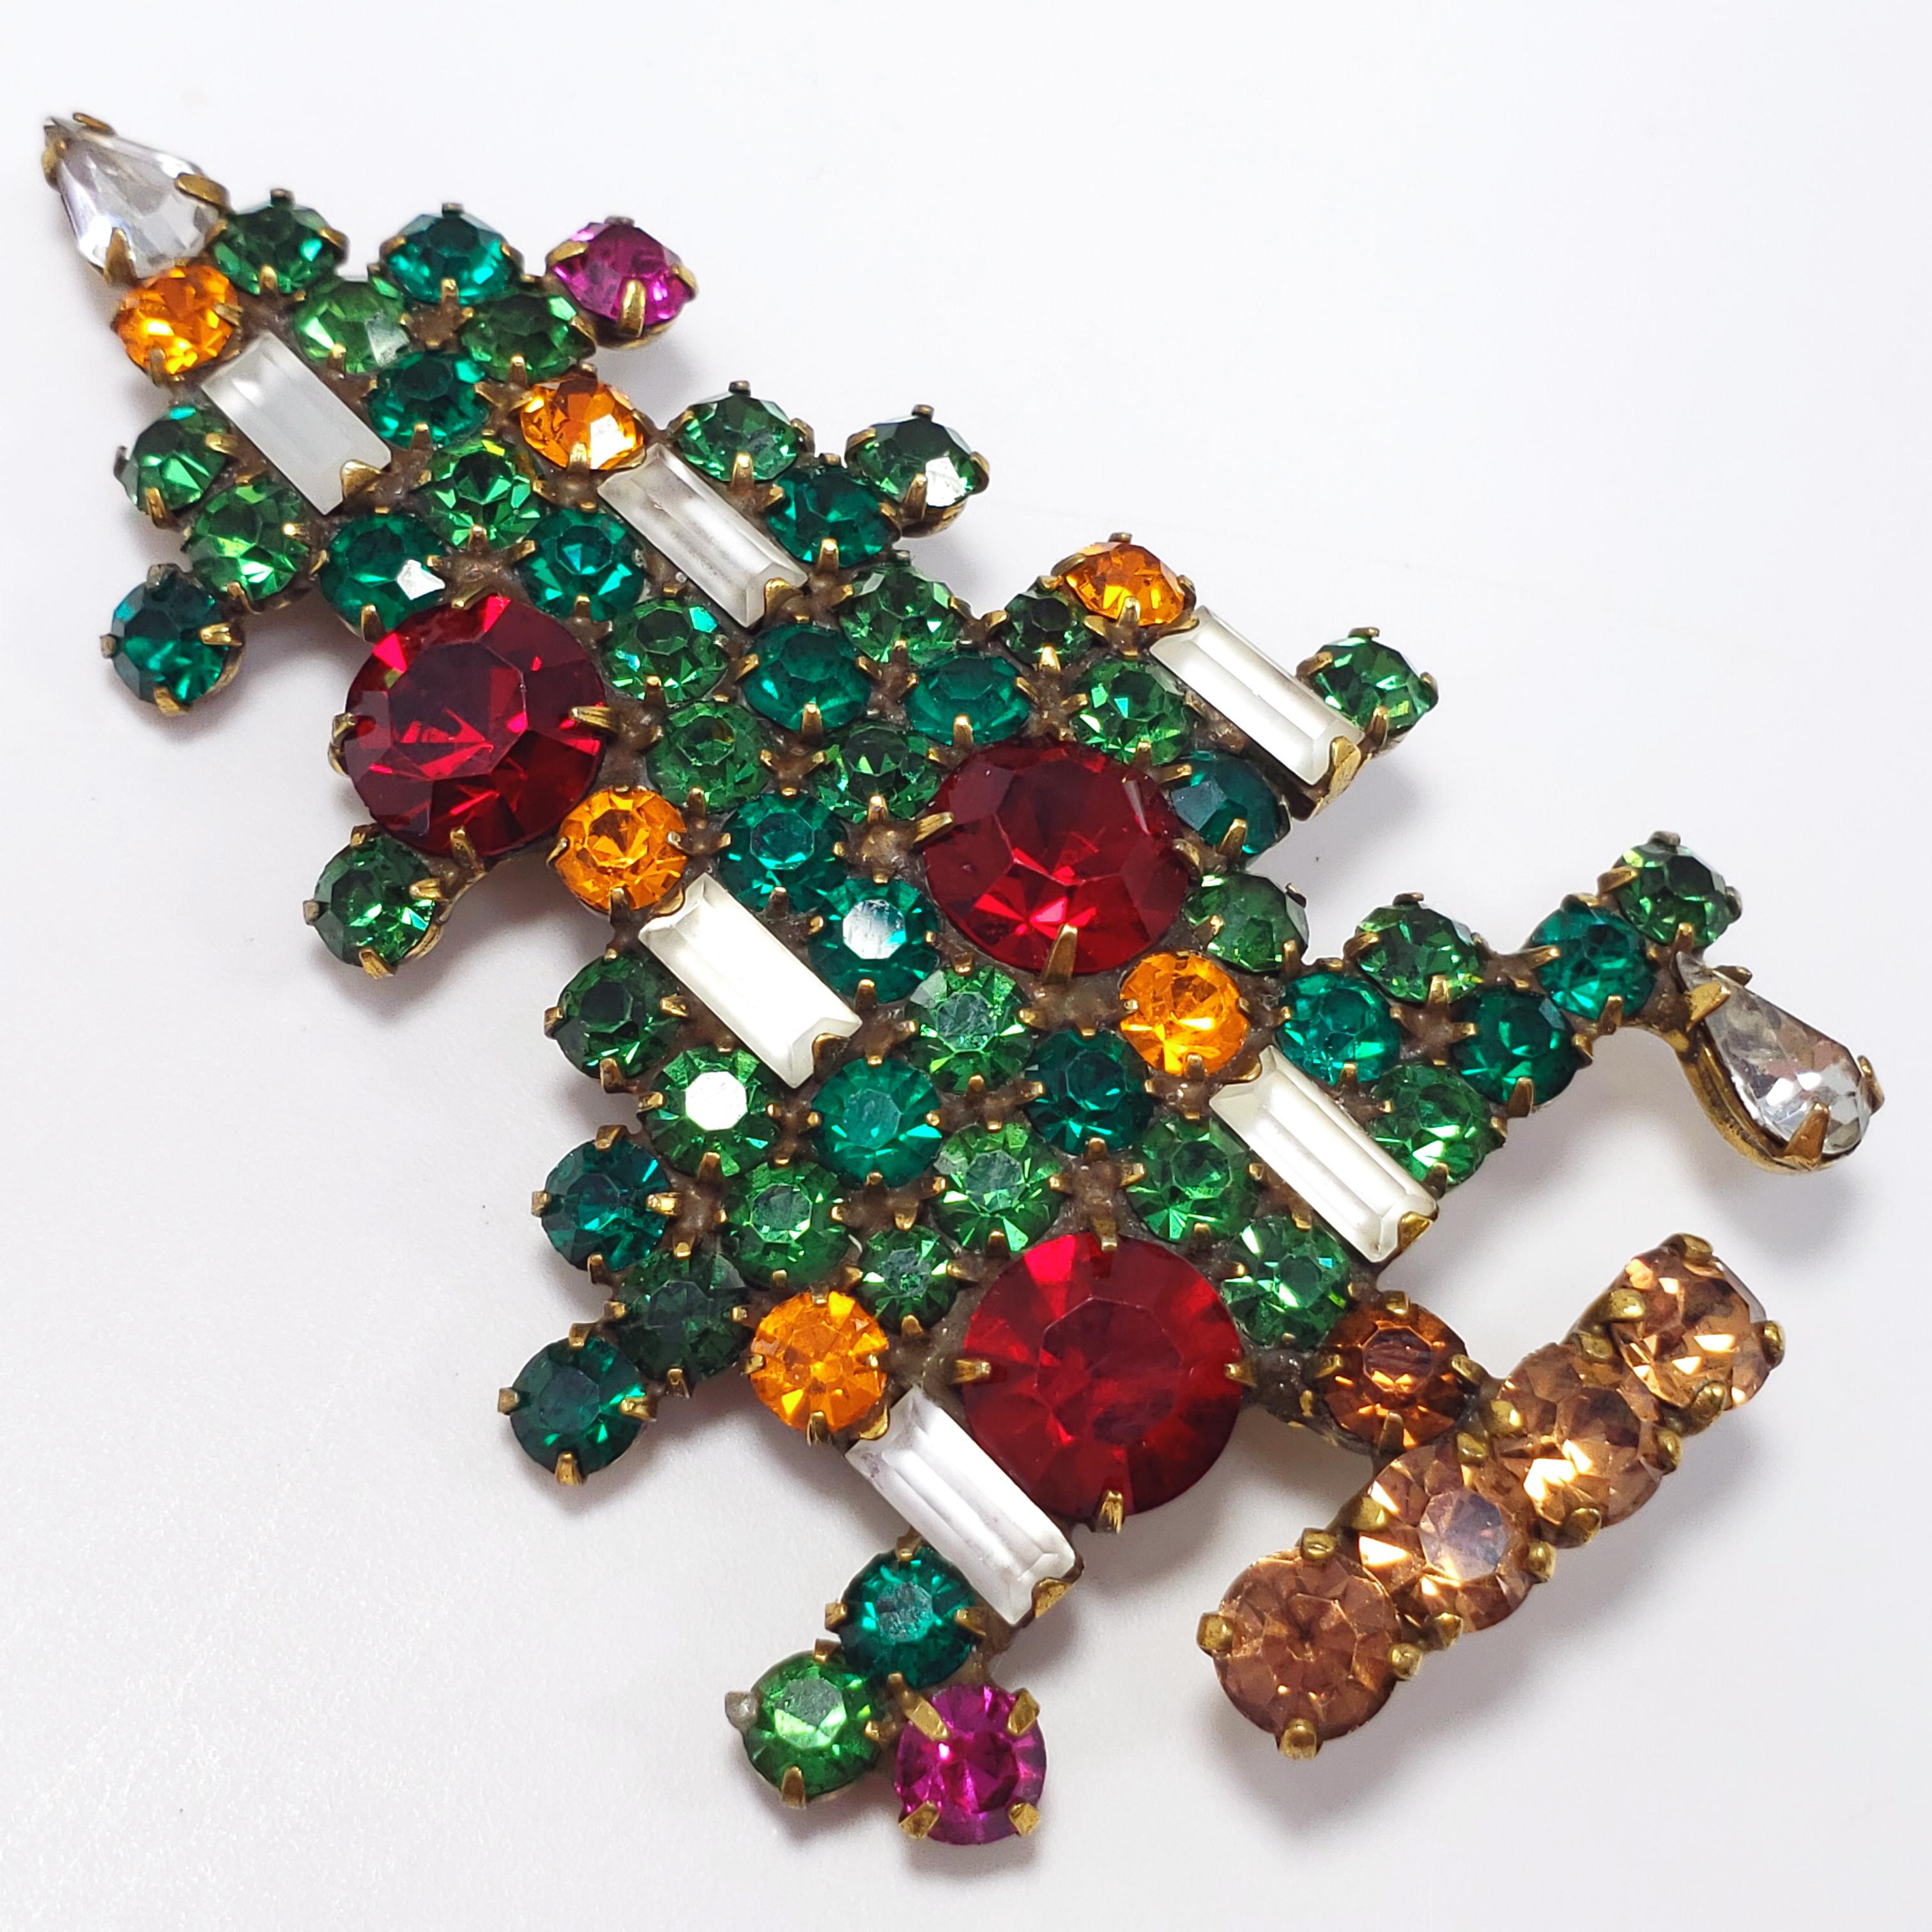 The most well known and most highly sought after Weiss Christmas tree pin, in its largest variant of 7x4 cm. This festive holiday brooch features green crystals, decorated with white baguette candles with gold flames, along with other sizes and